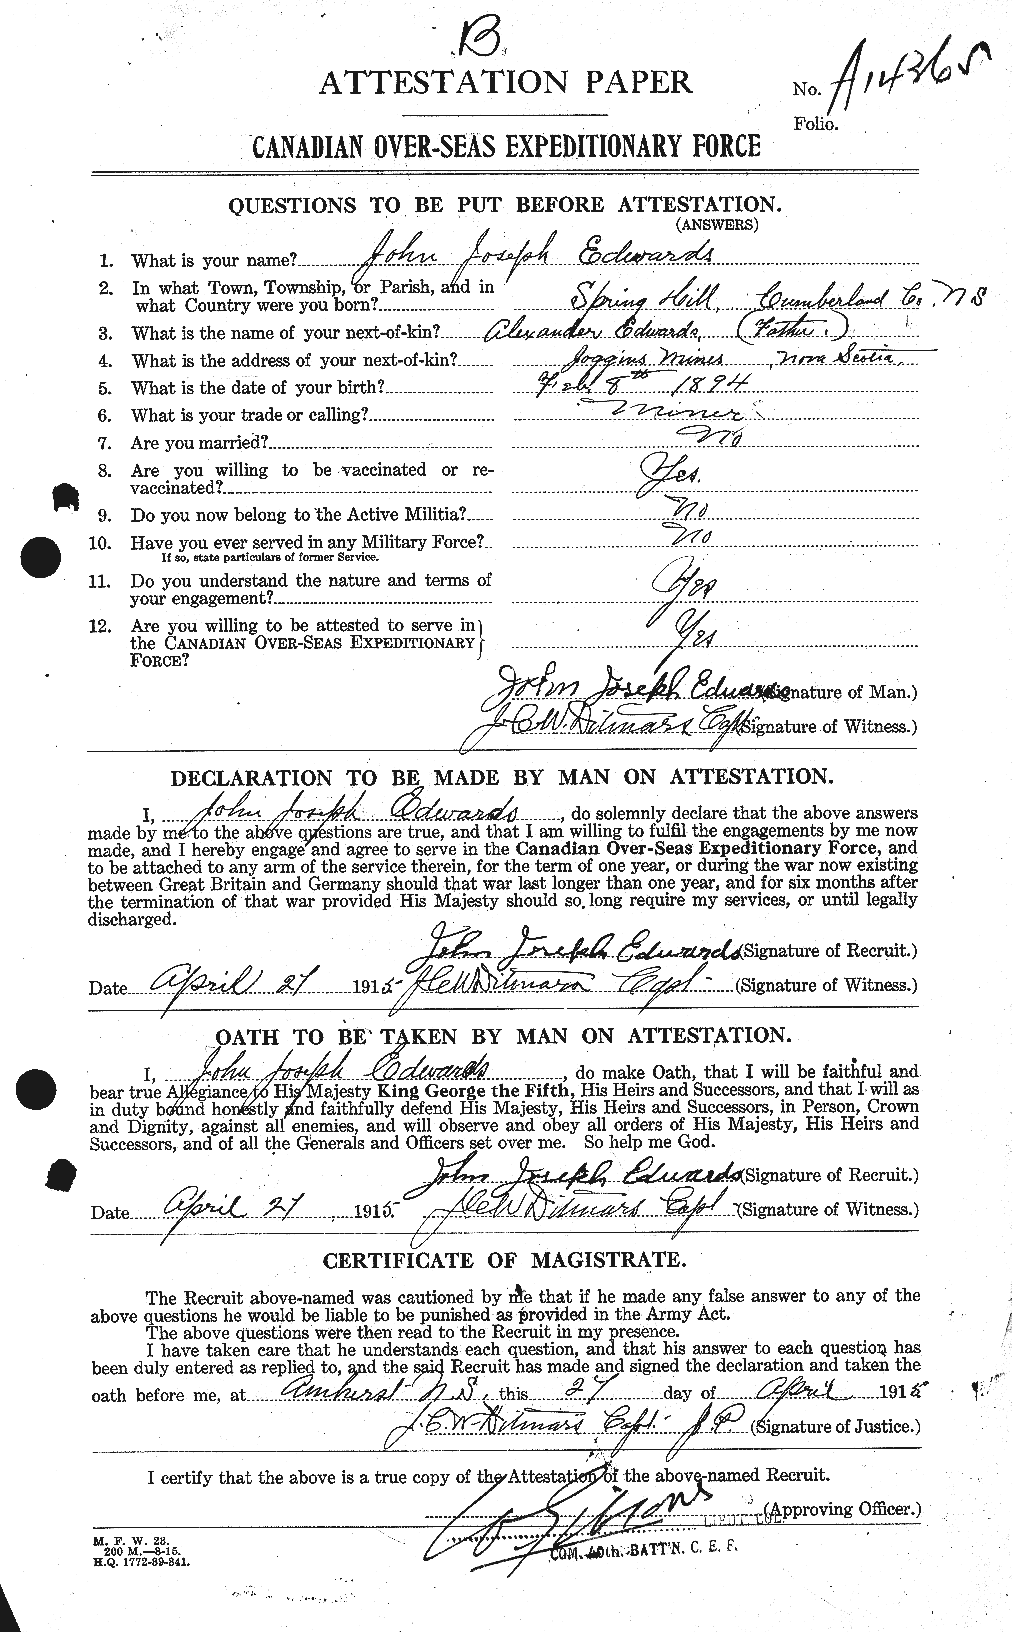 Personnel Records of the First World War - CEF 310142a